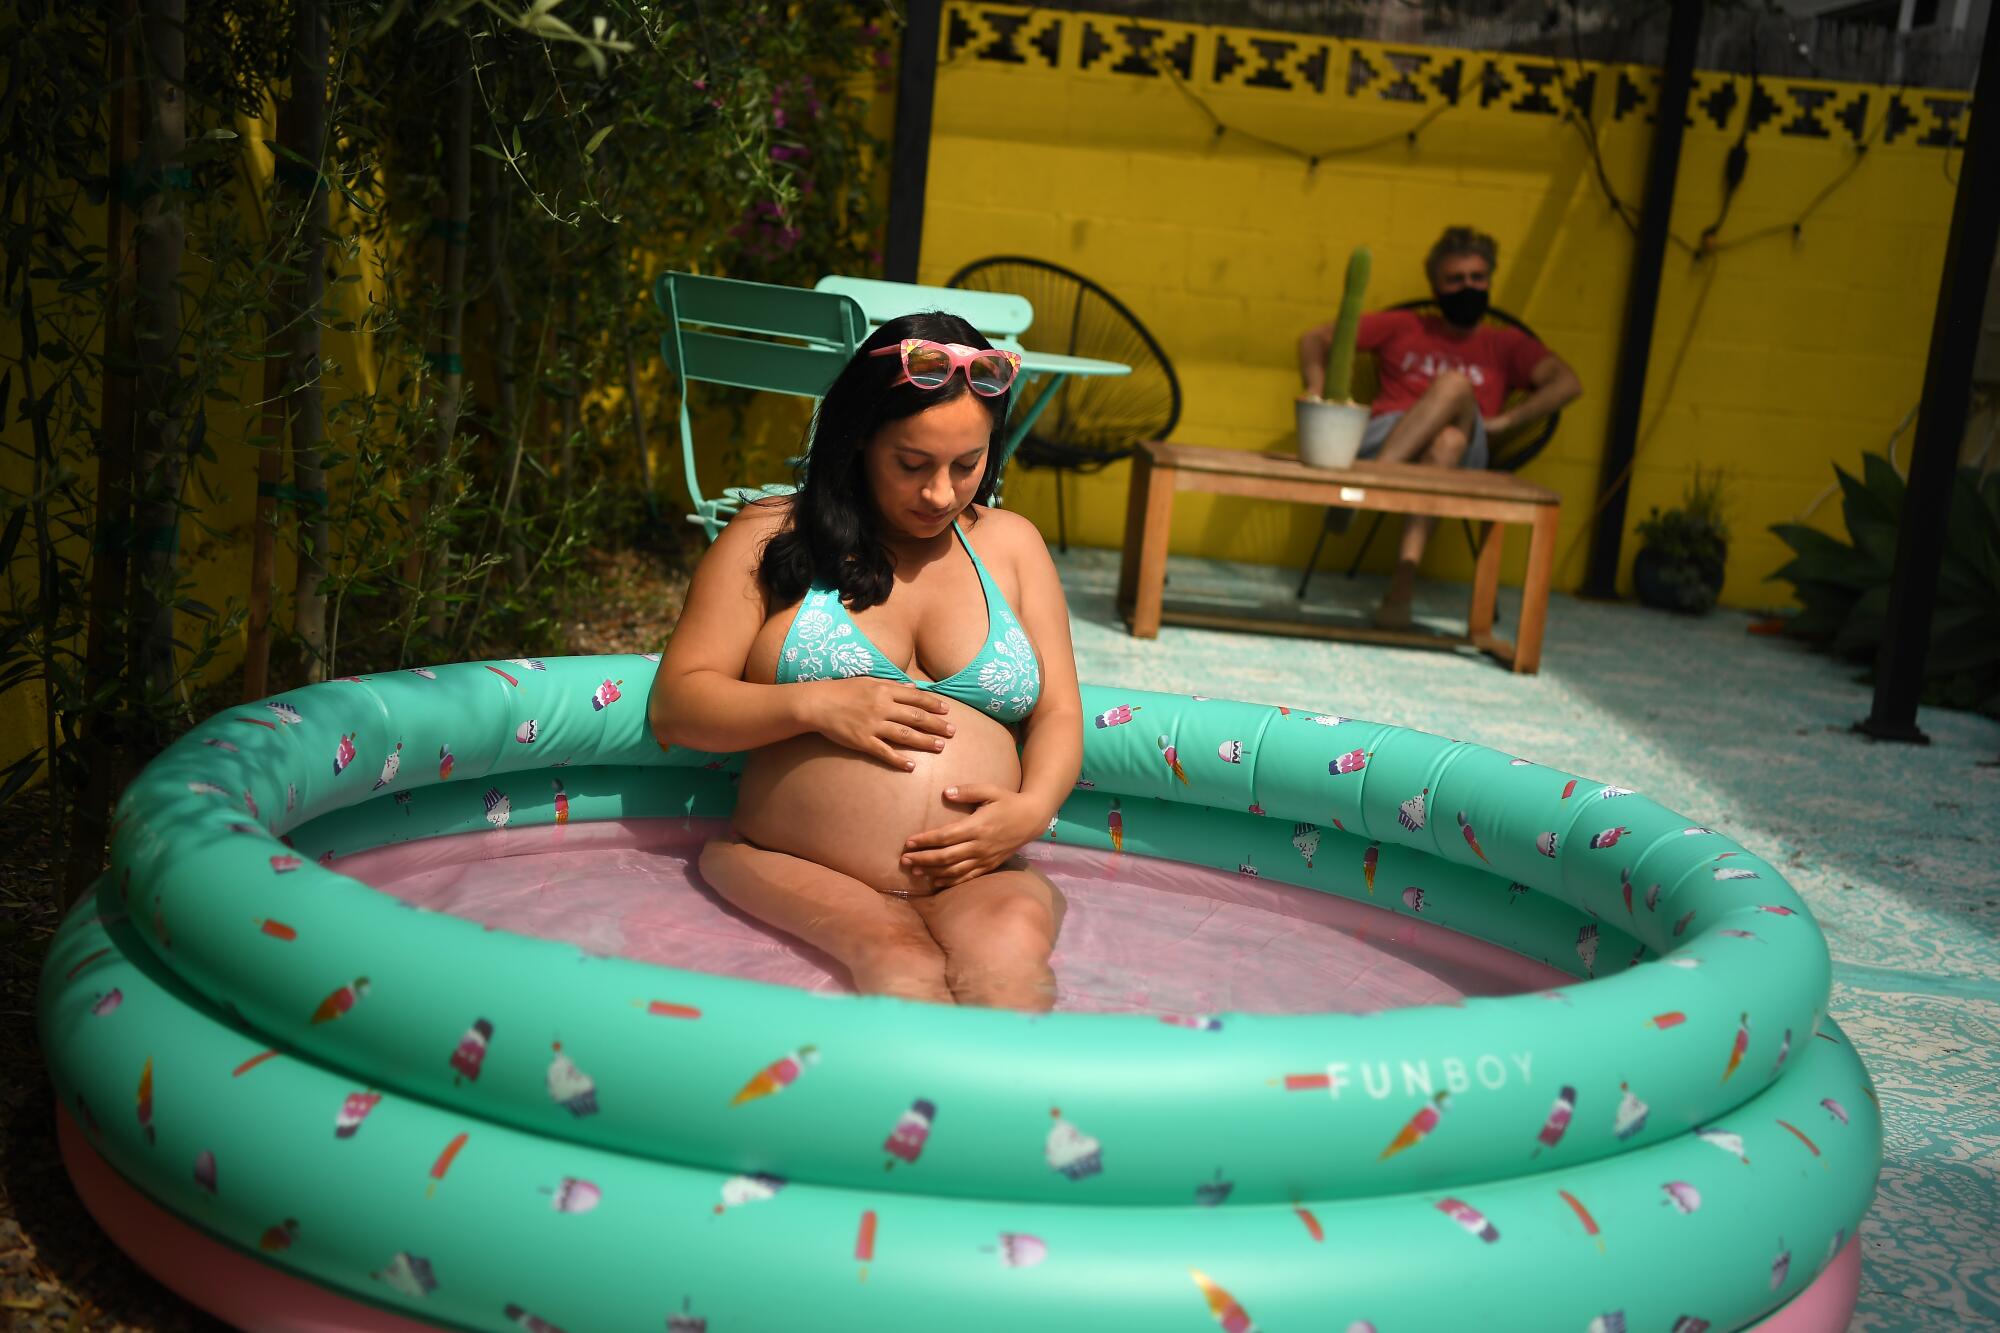 A pregnant woman in a green bikini has her hands on her belly while sitting in an inflatable pool